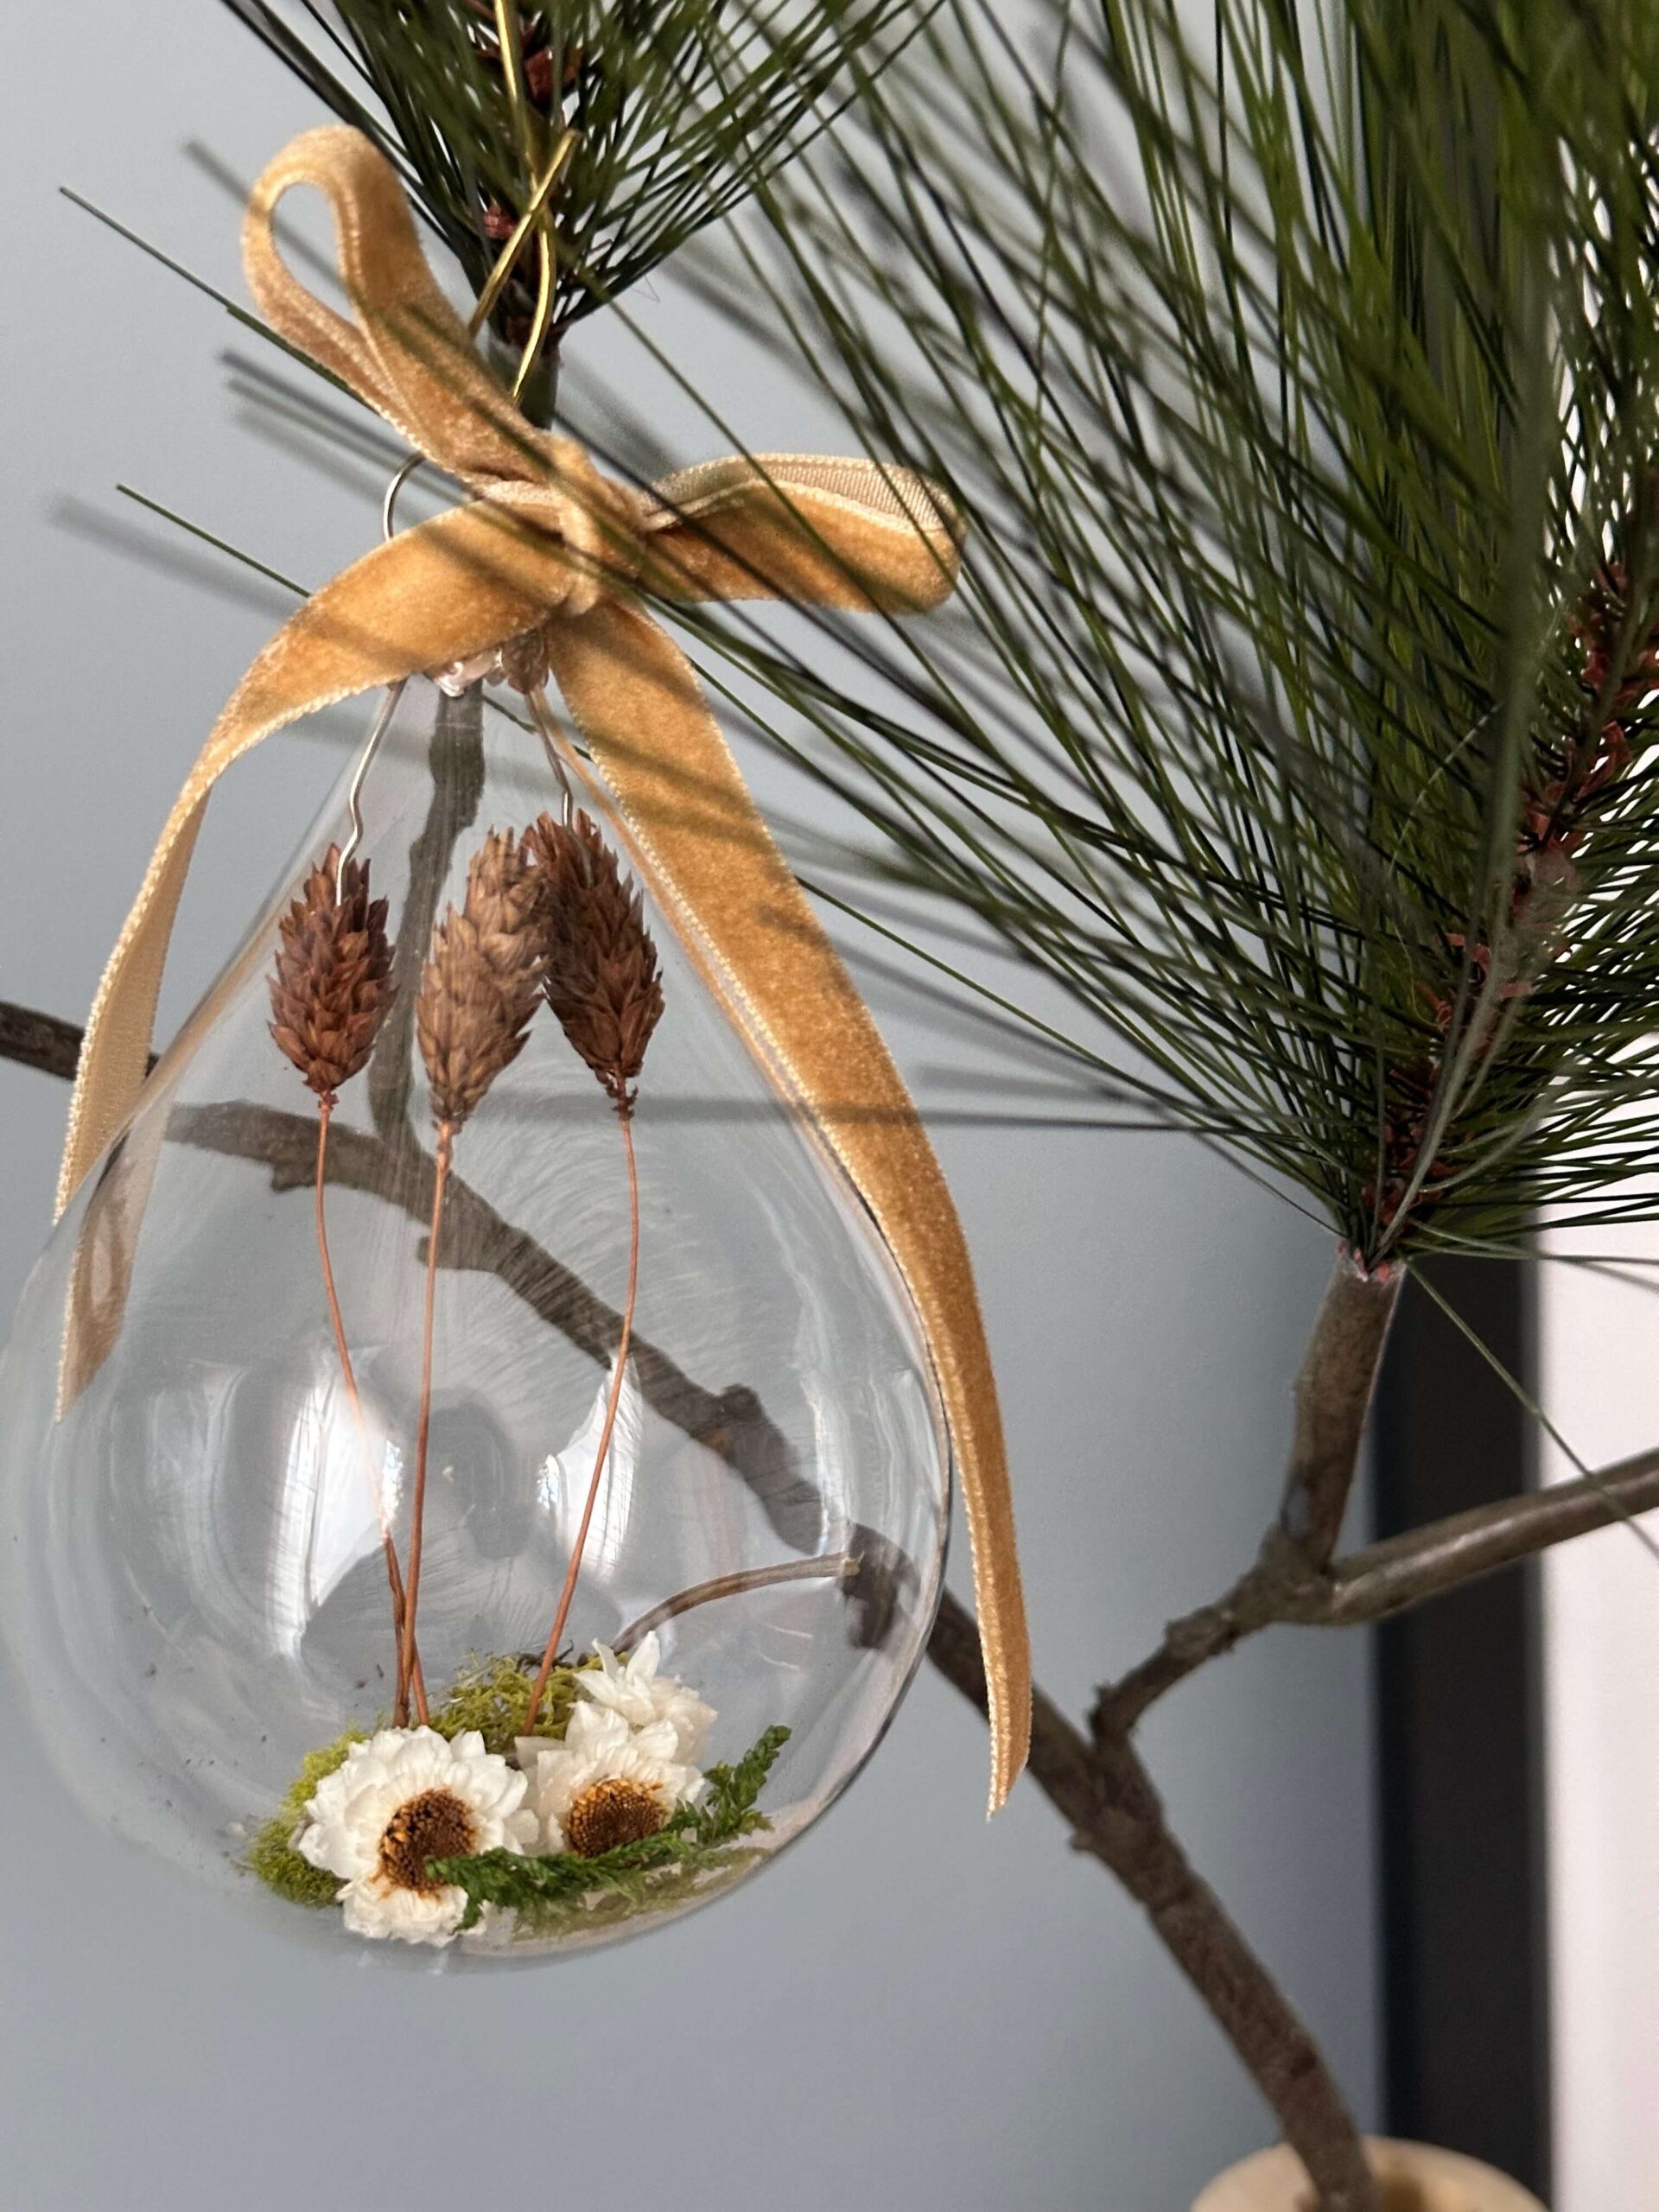 Glass Christmas Ornament with dried flowers